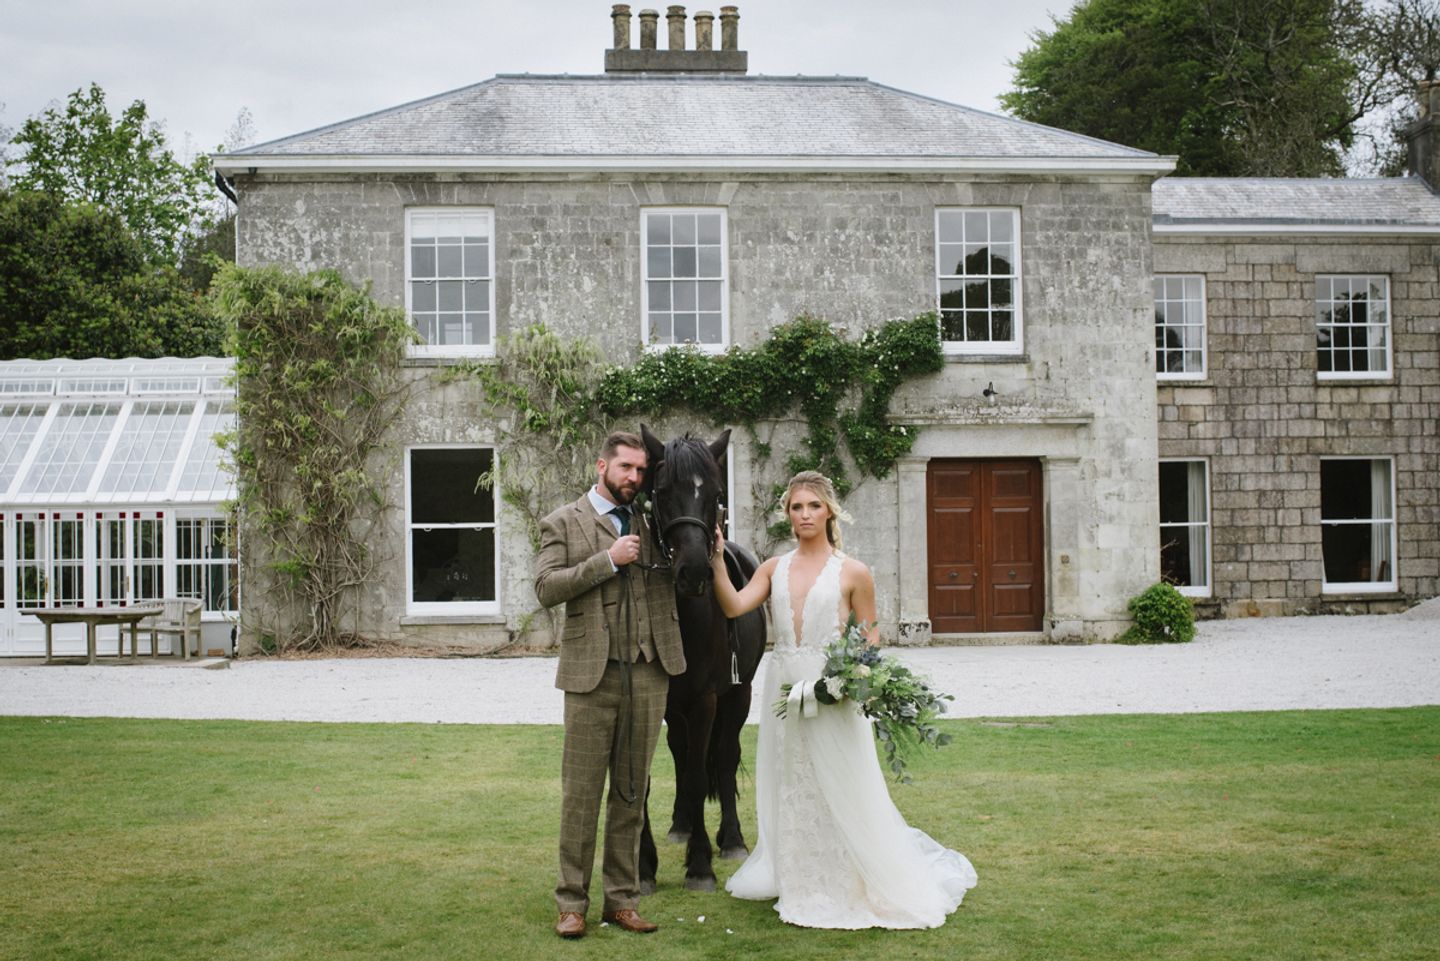 Bride and groom pose with horse in front of Cornish country house